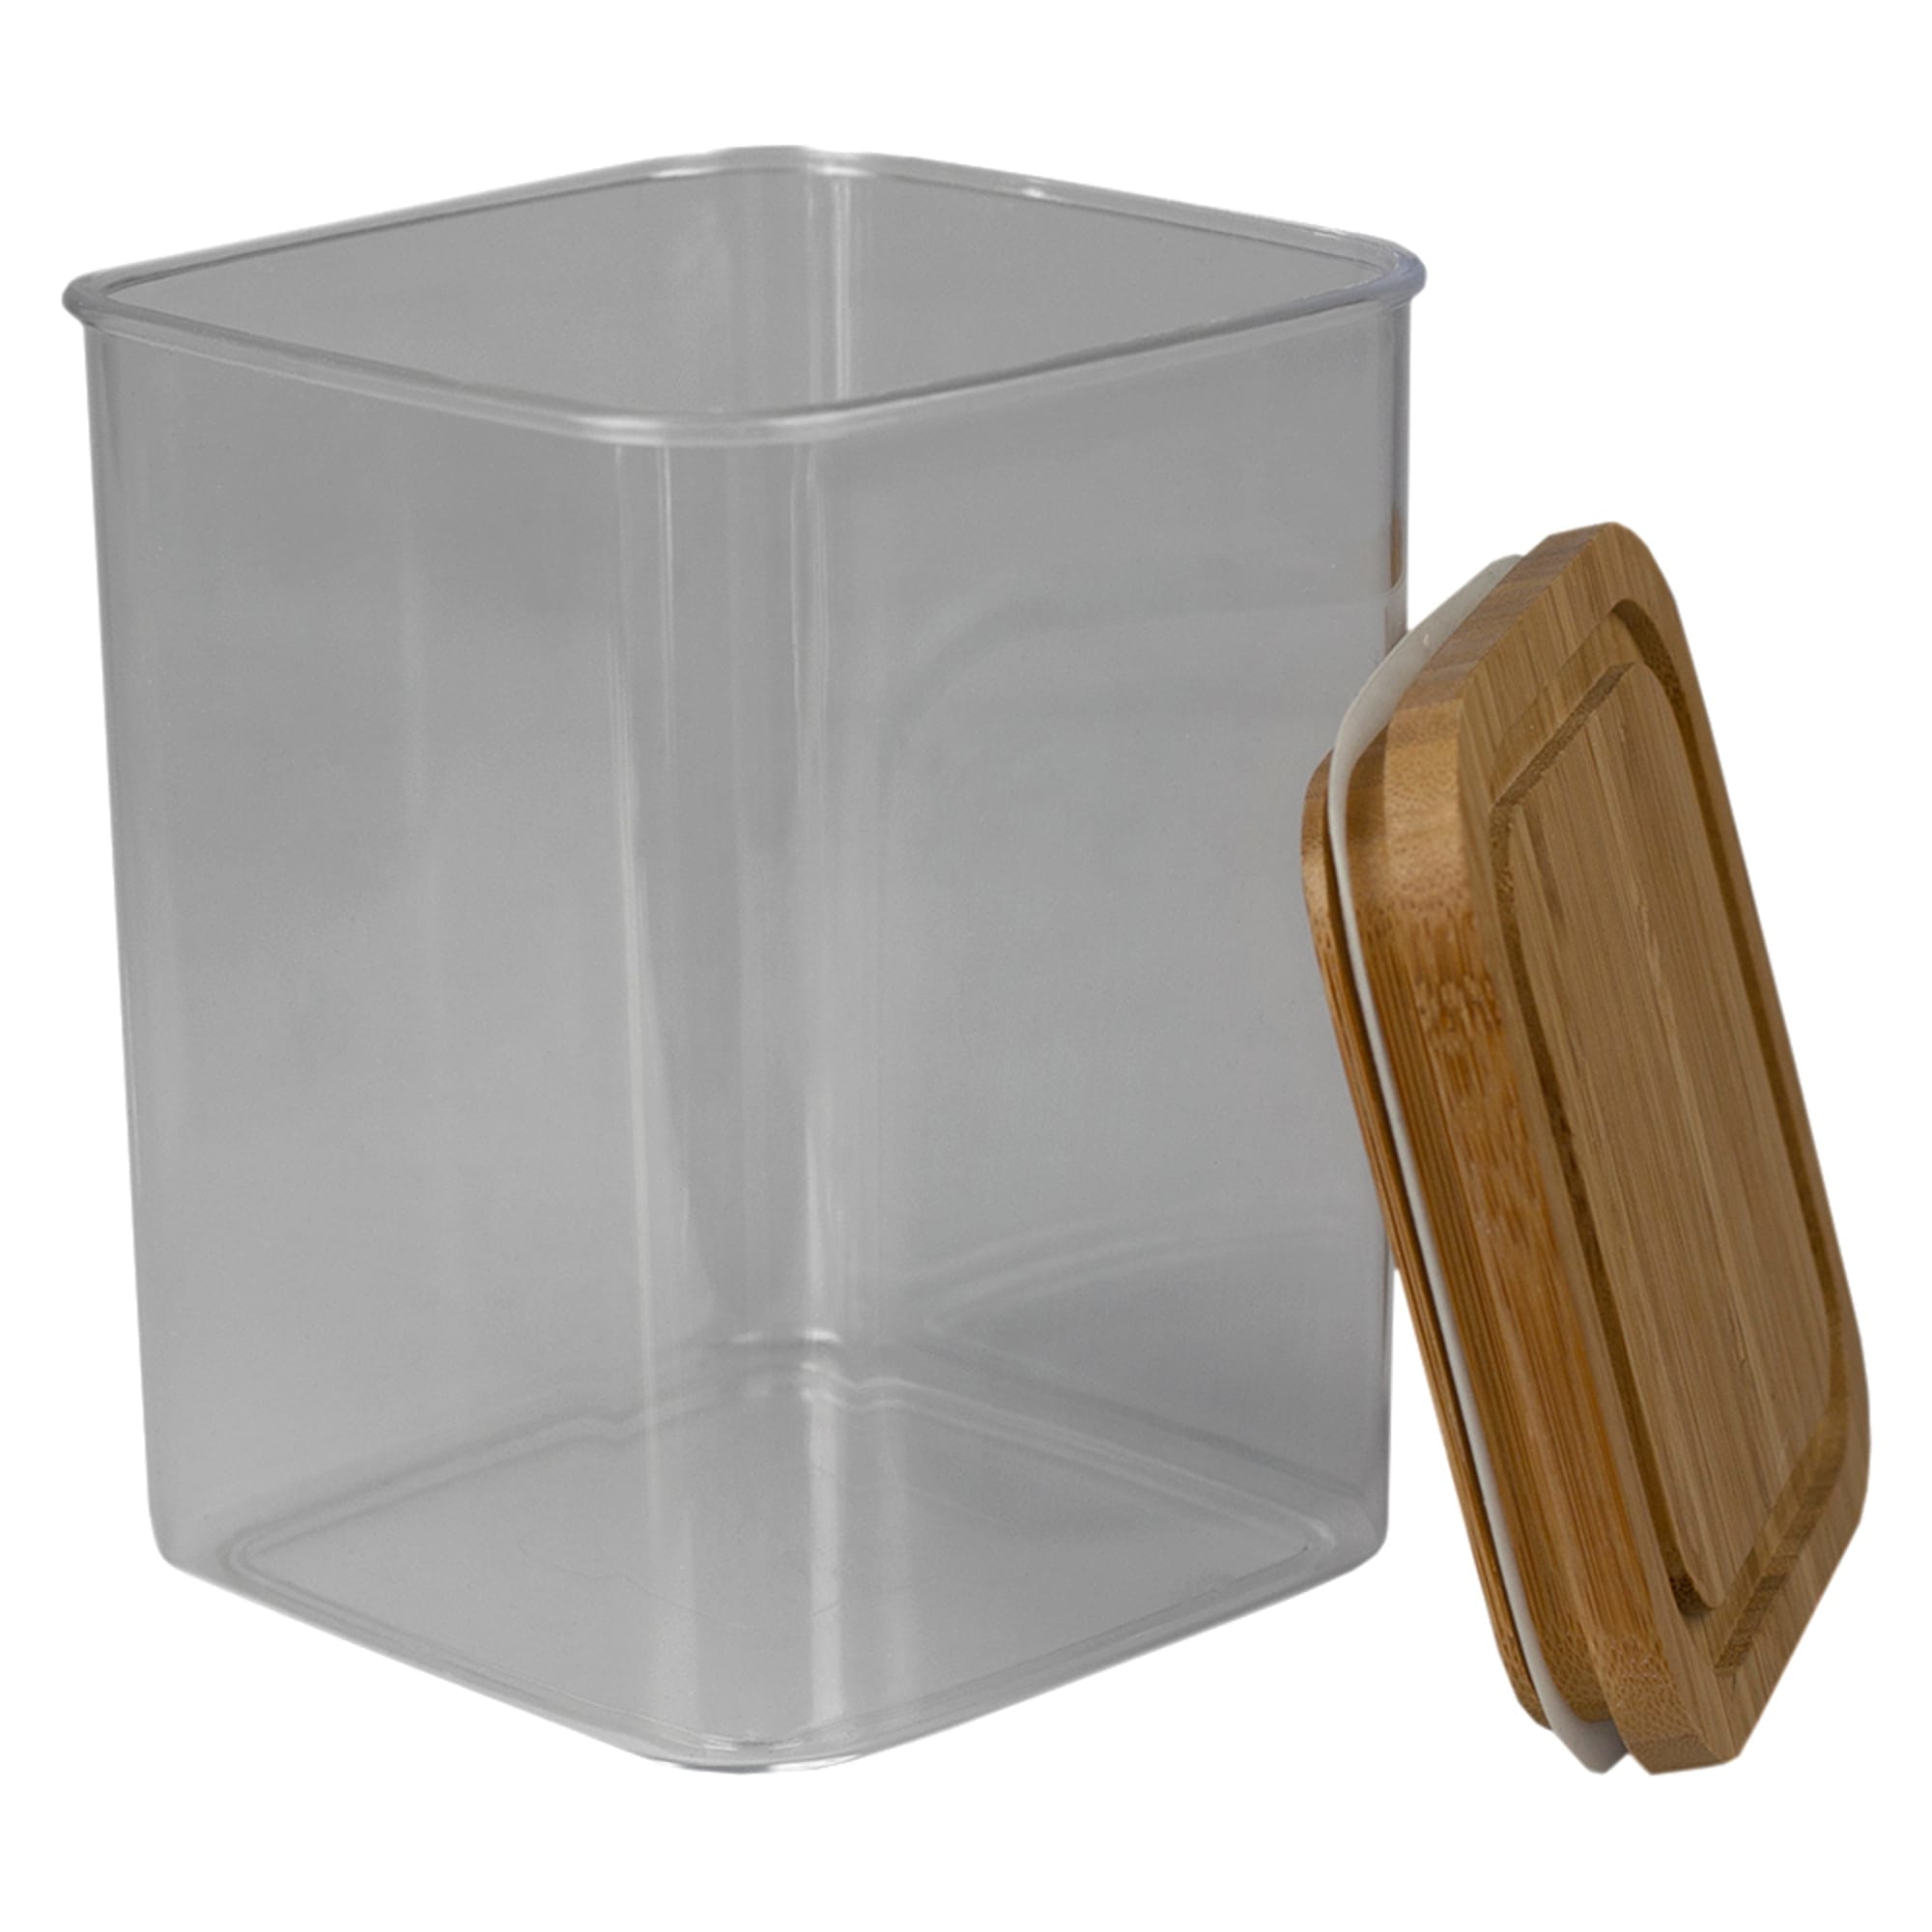 Home Basics BPA-Free Square Plastic 1.7 LT Canister with Air-Tight Silicone Sealed Bamboo Lid $6.00 EACH, CASE PACK OF 12